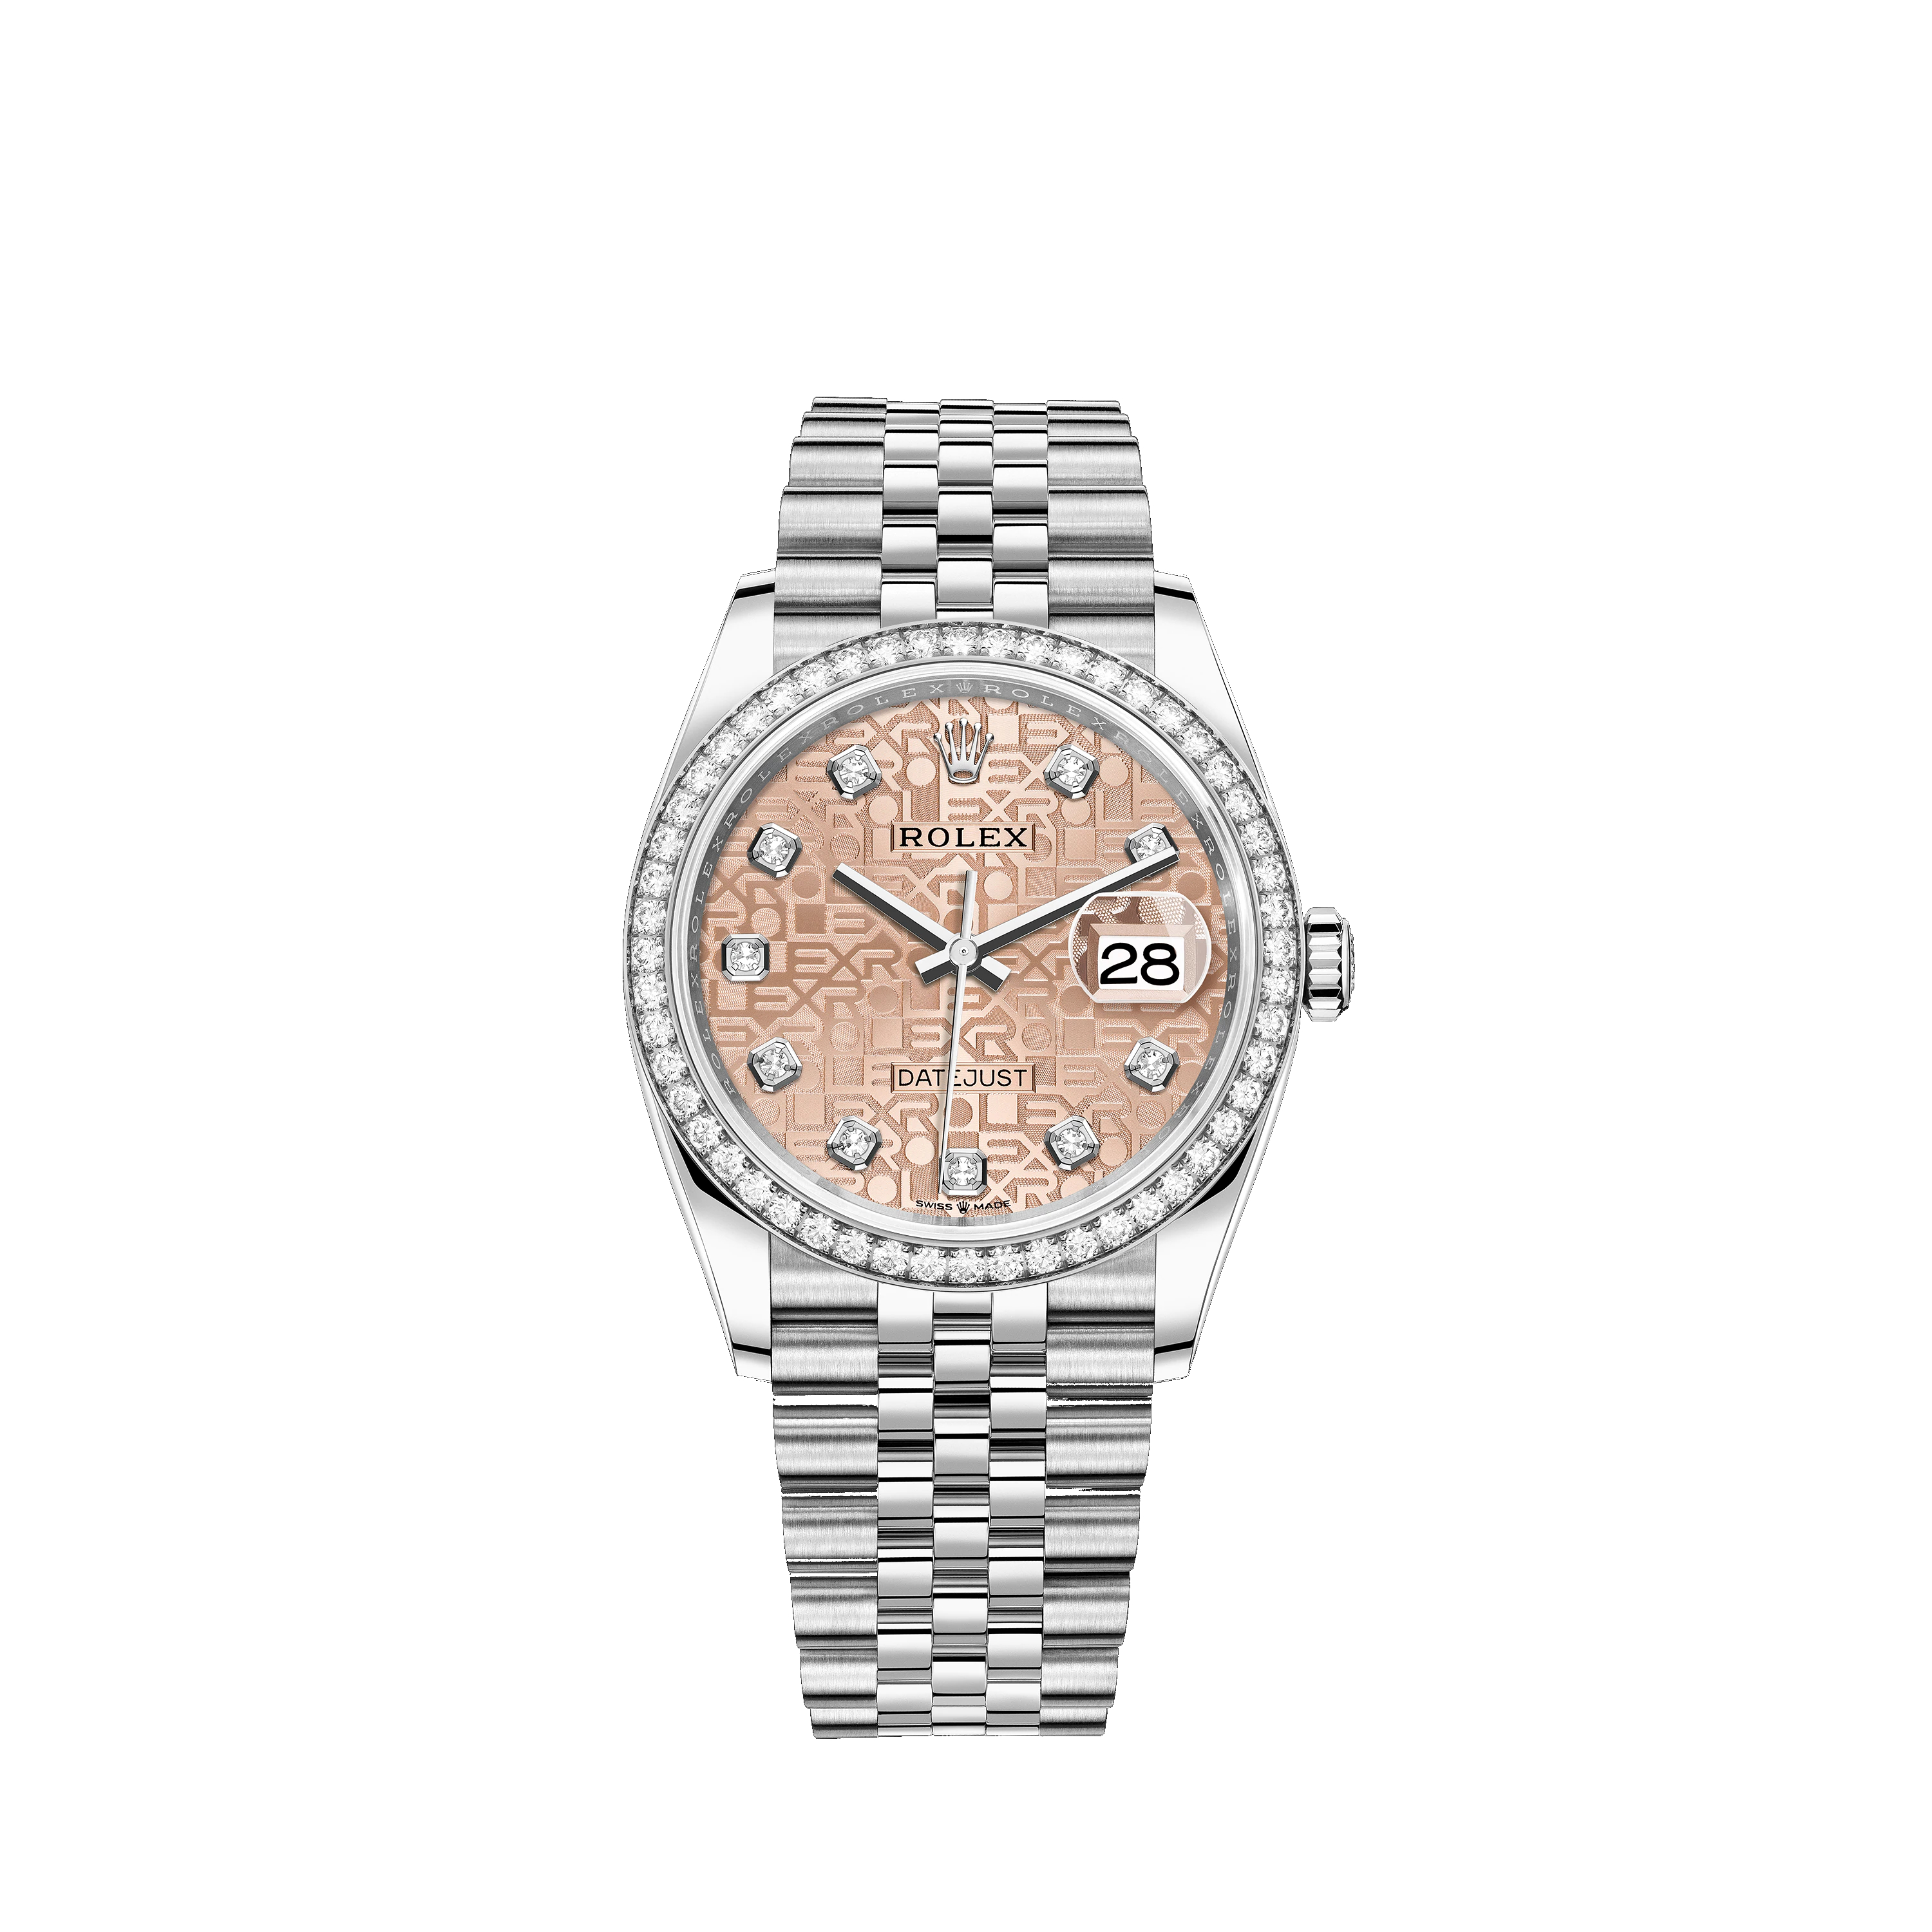 Datejust 36 126284RBR White Gold, Stainless Steel & Diamonds Watch (Pink Jubilee Design Set with Diamonds) - Click Image to Close